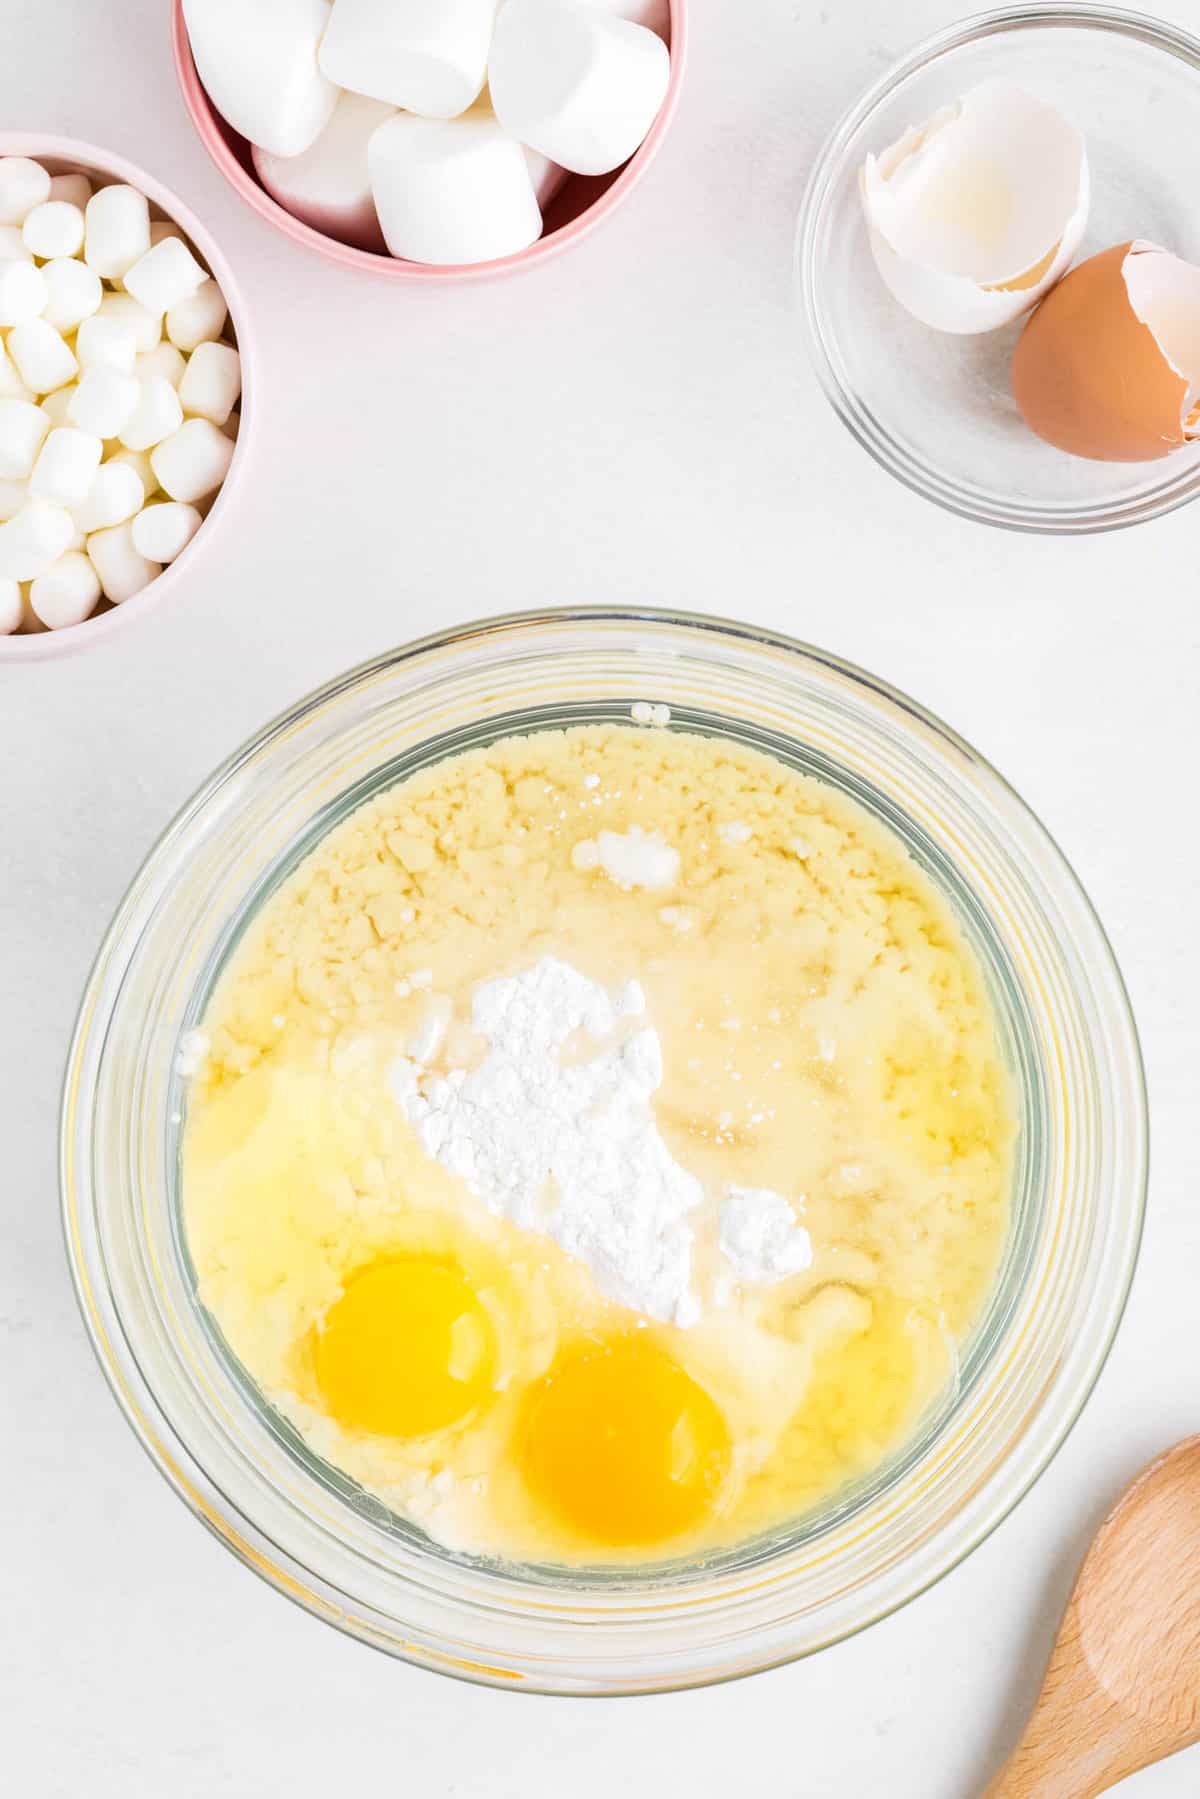 Add Cake Mix, Eggs and oil to a mixing bowl and mix until combined.